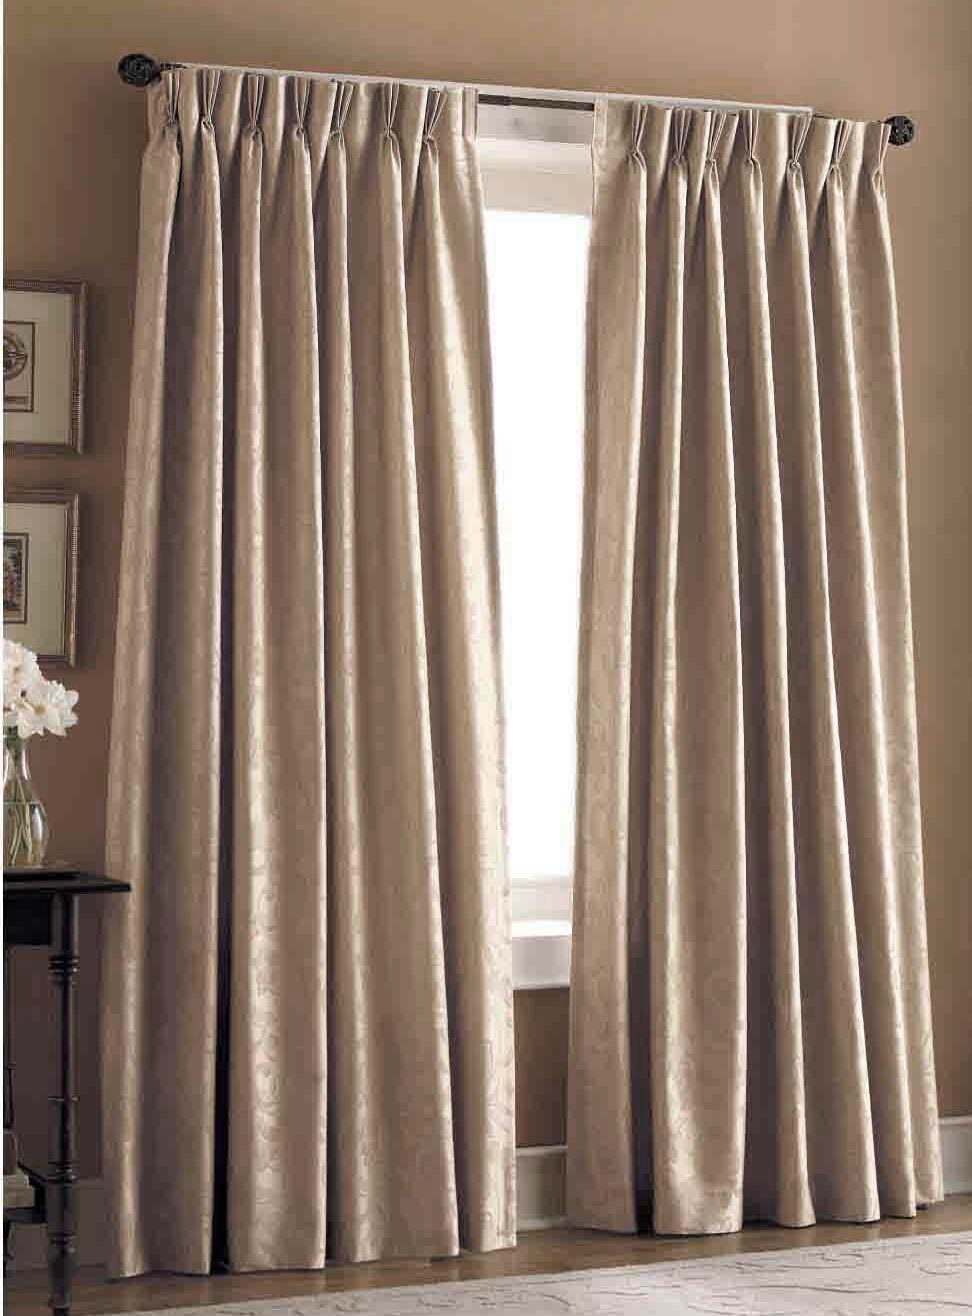 What Is A Pinch Pleat Curtain Pinch Pleat Drapes Cleara